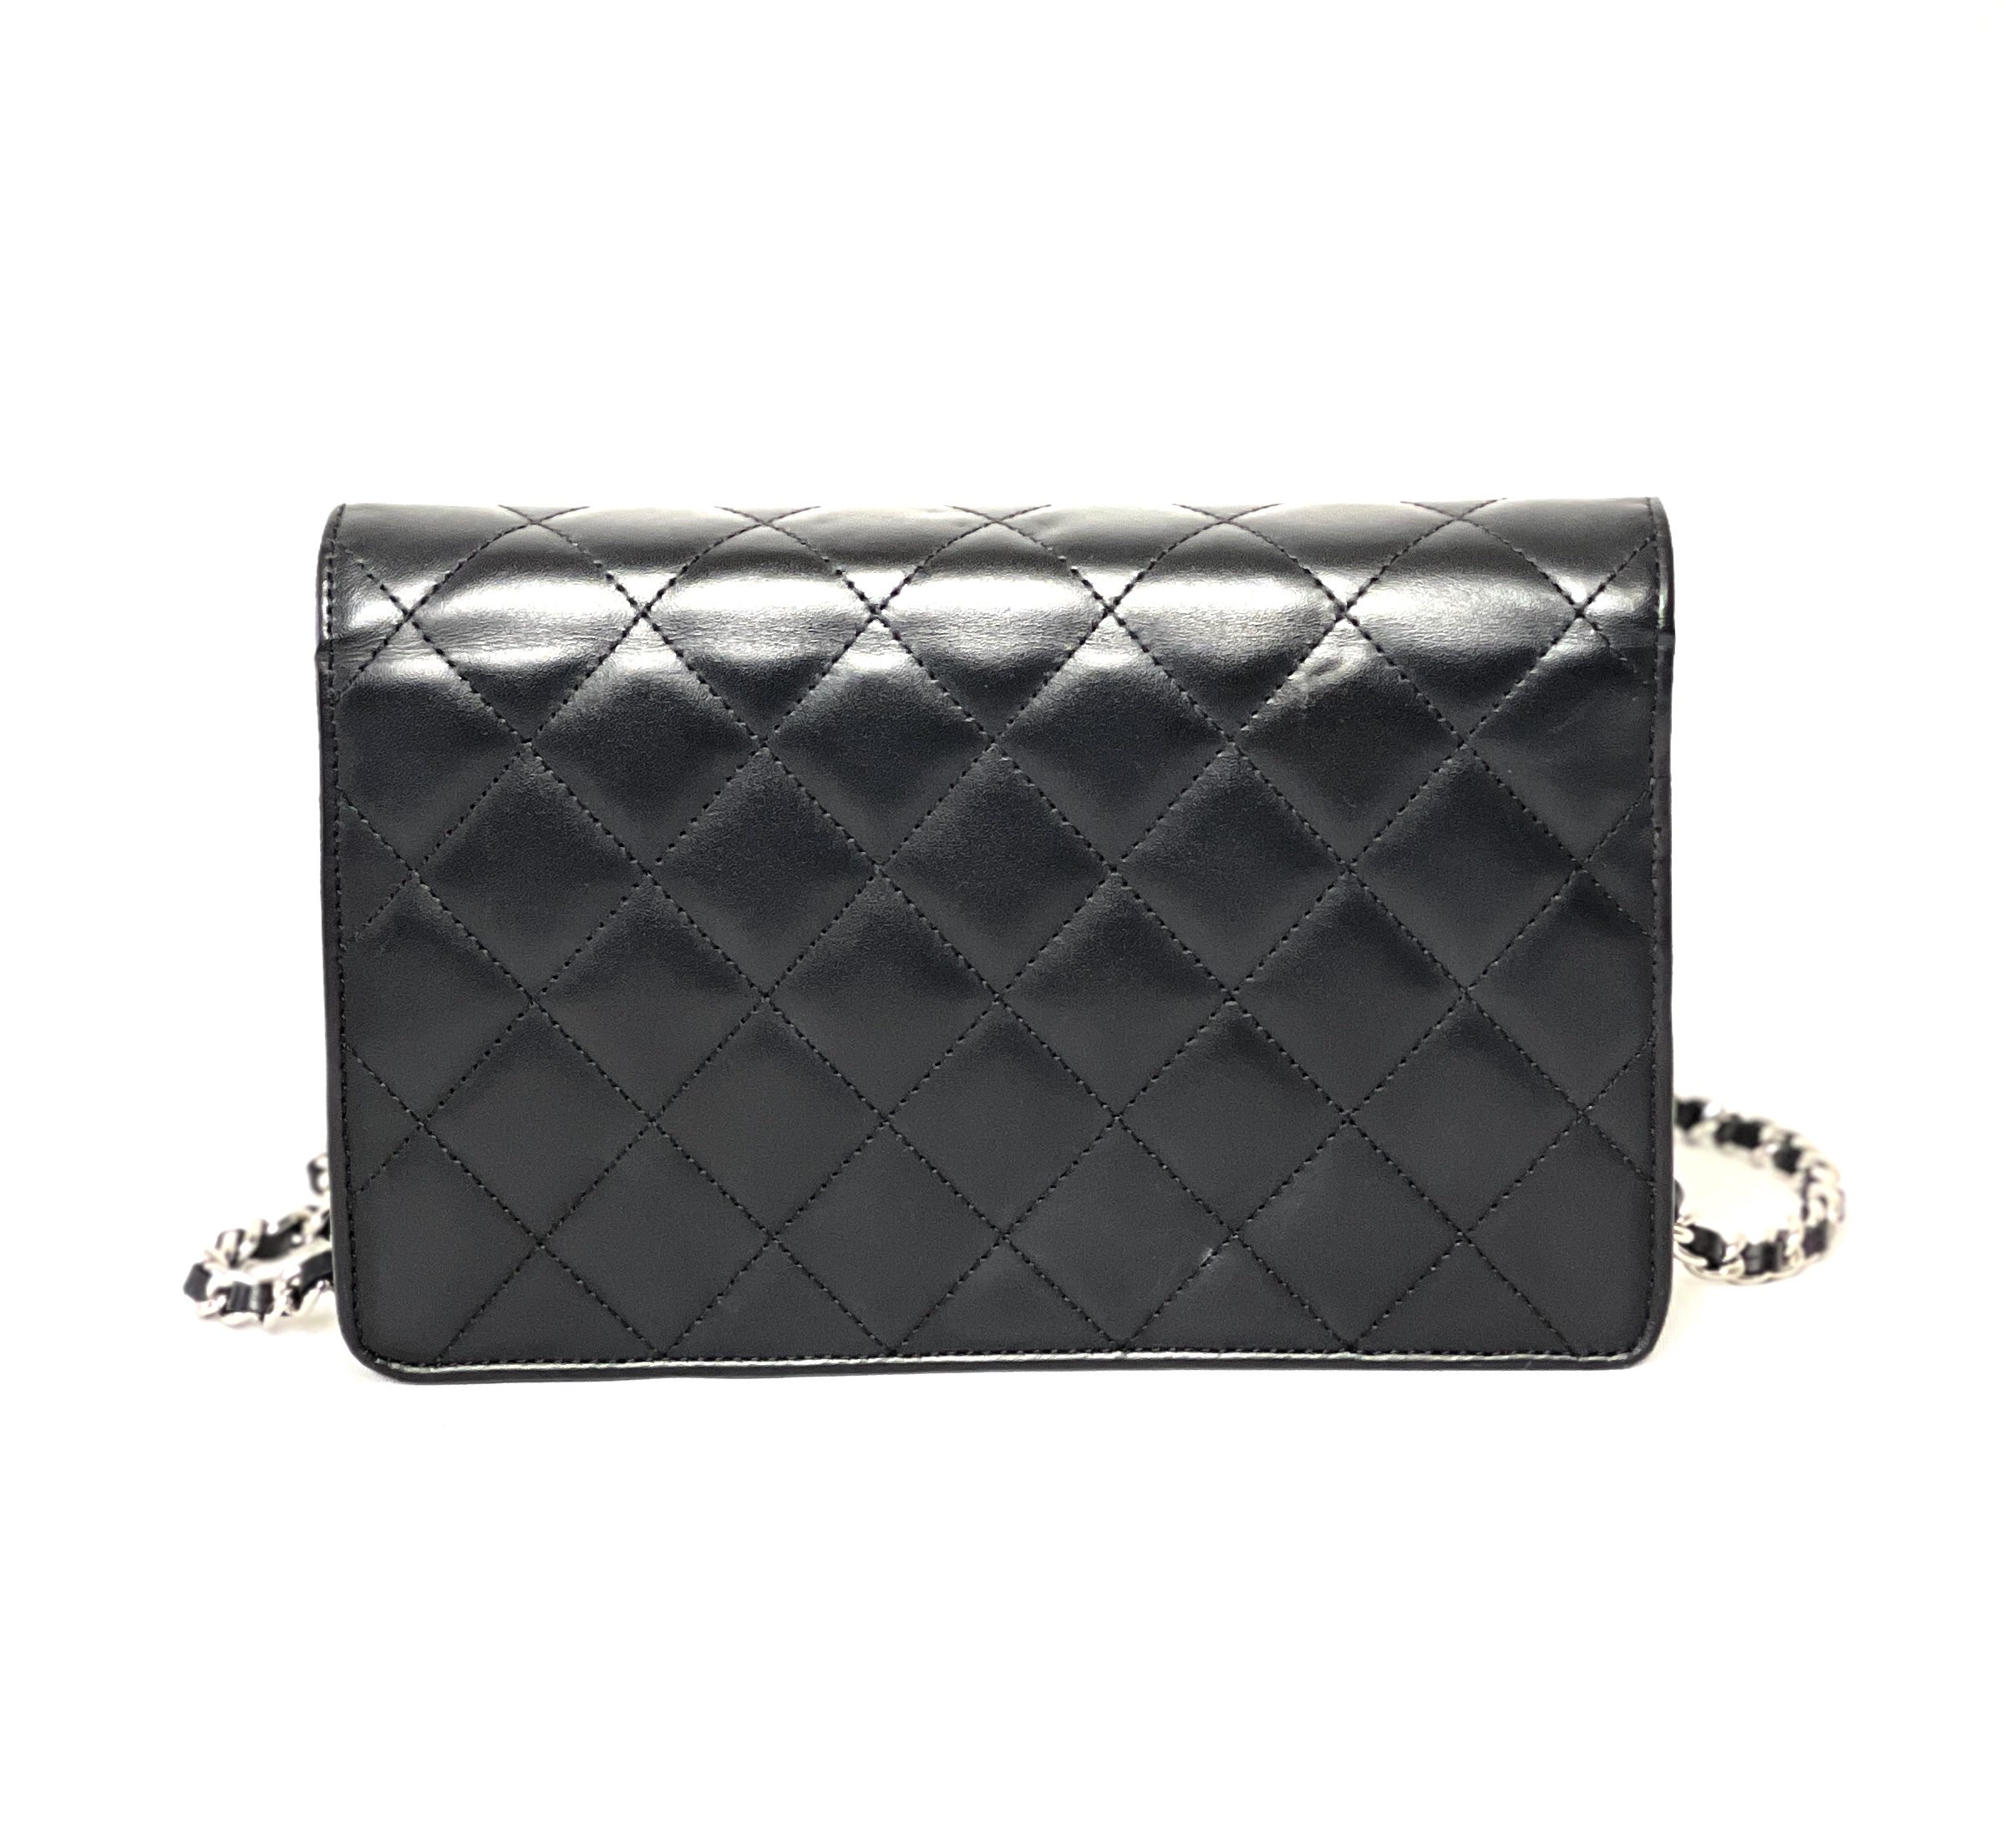 CHANEL Black Quilted Leather Cambon Ligne WOC Clutch Bag - A World